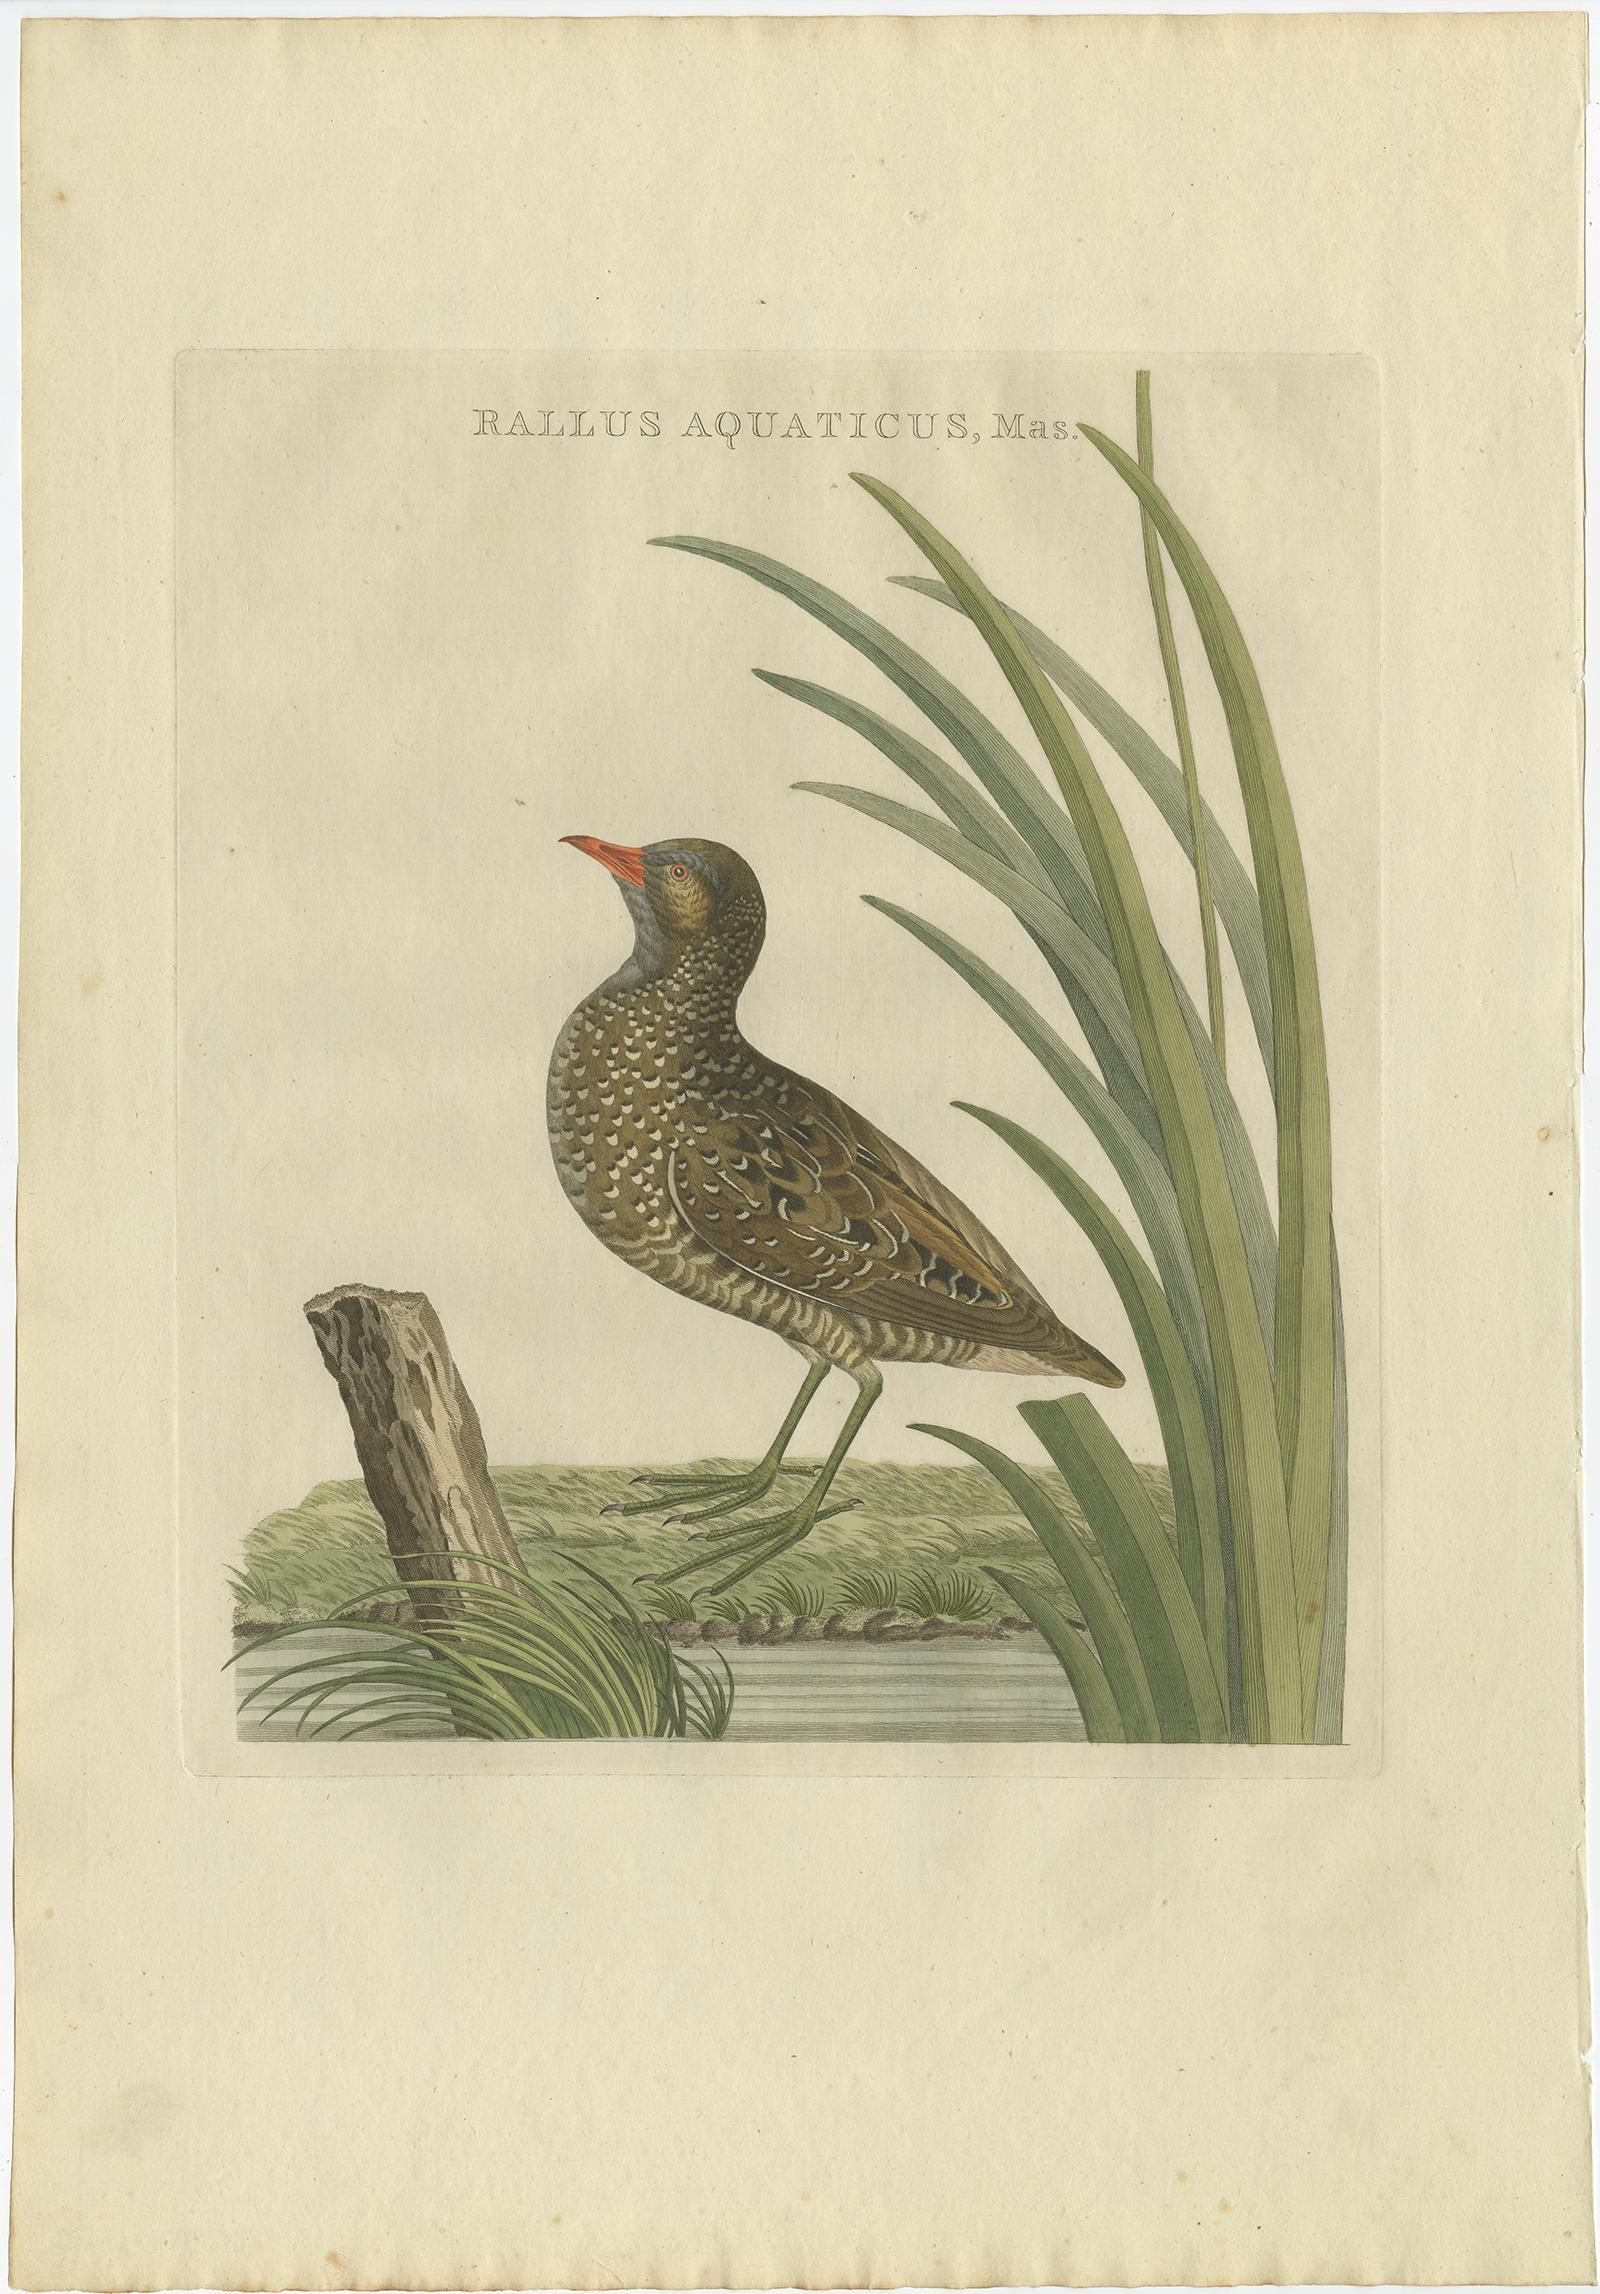 Antique print titled ‘Rallus Aquaticus, Mas'. 

This print depicts a male water rail (Dutch: waterral). The water rail (Rallus aquaticus) is a bird of the rail family which breeds in well-vegetated wetlands across Europe, Asia and North Africa.